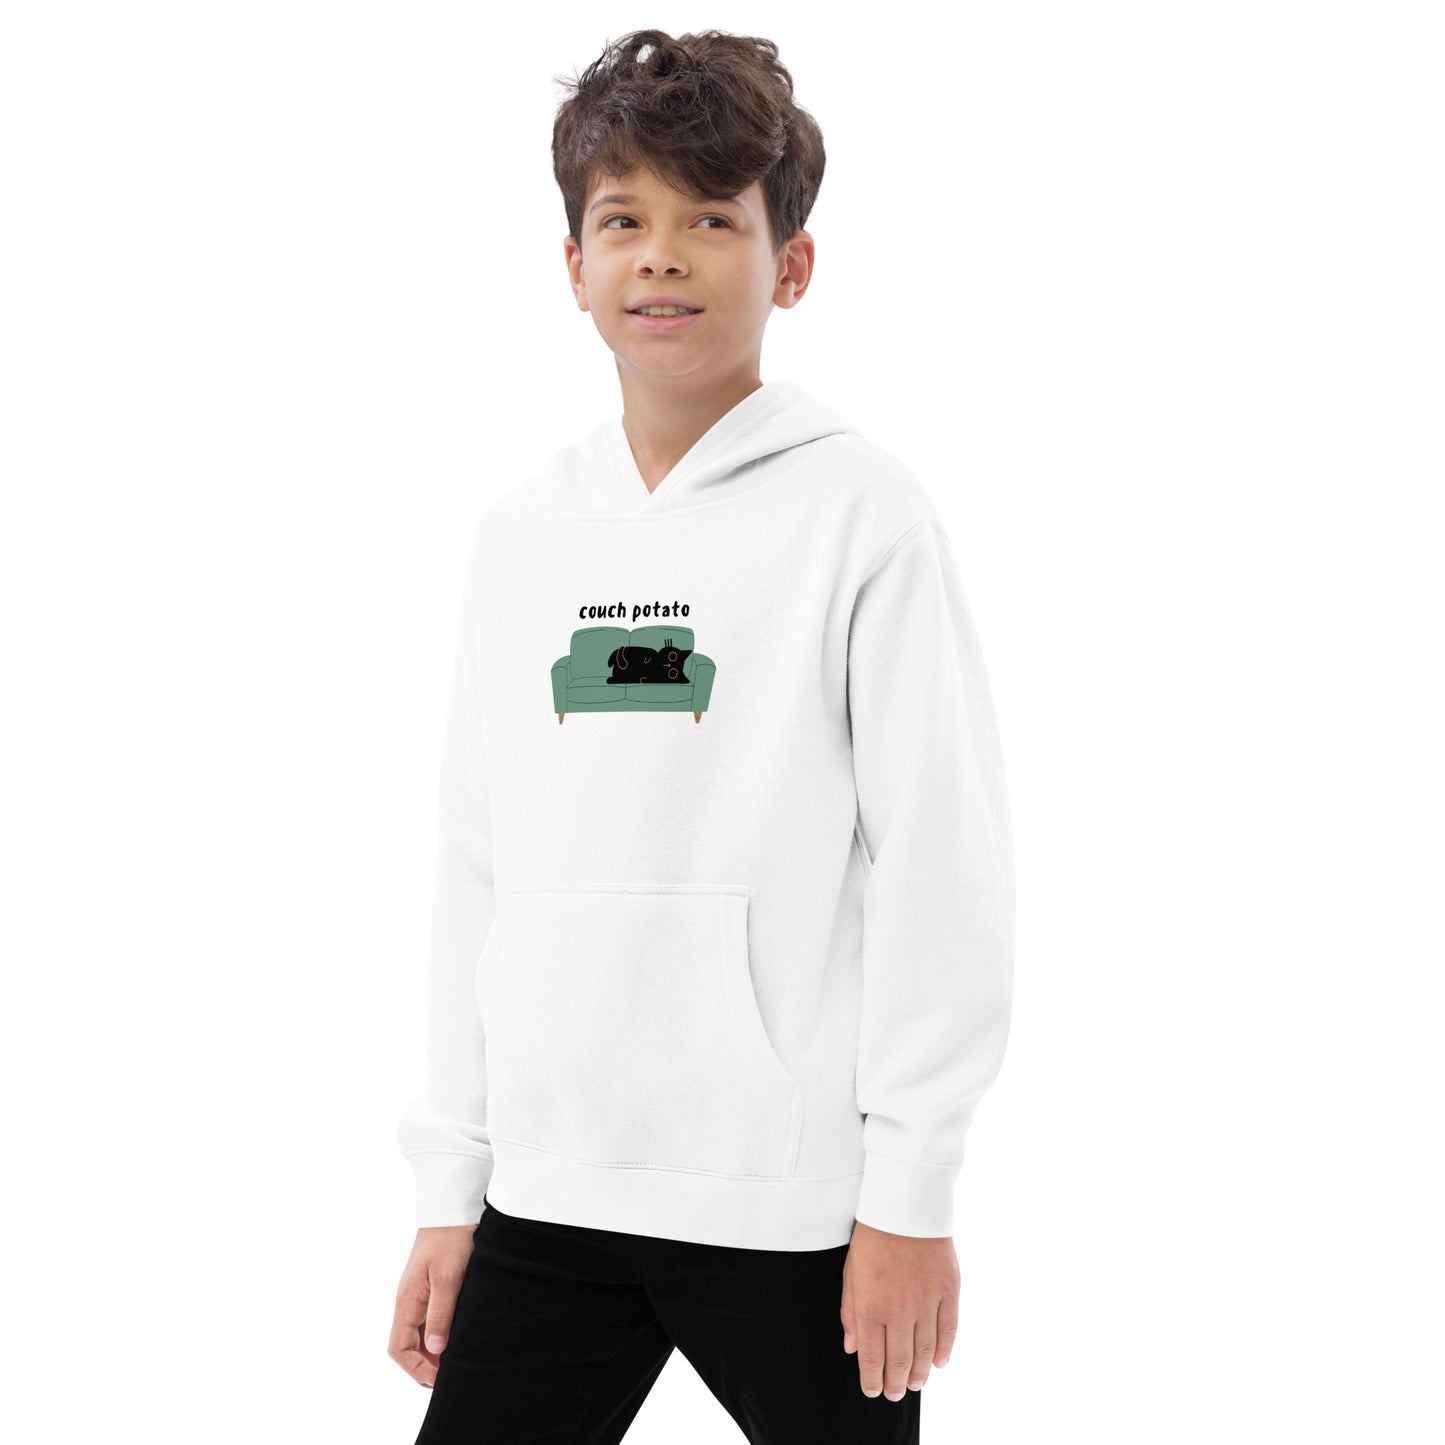 Couch Potato Kids Hoodie